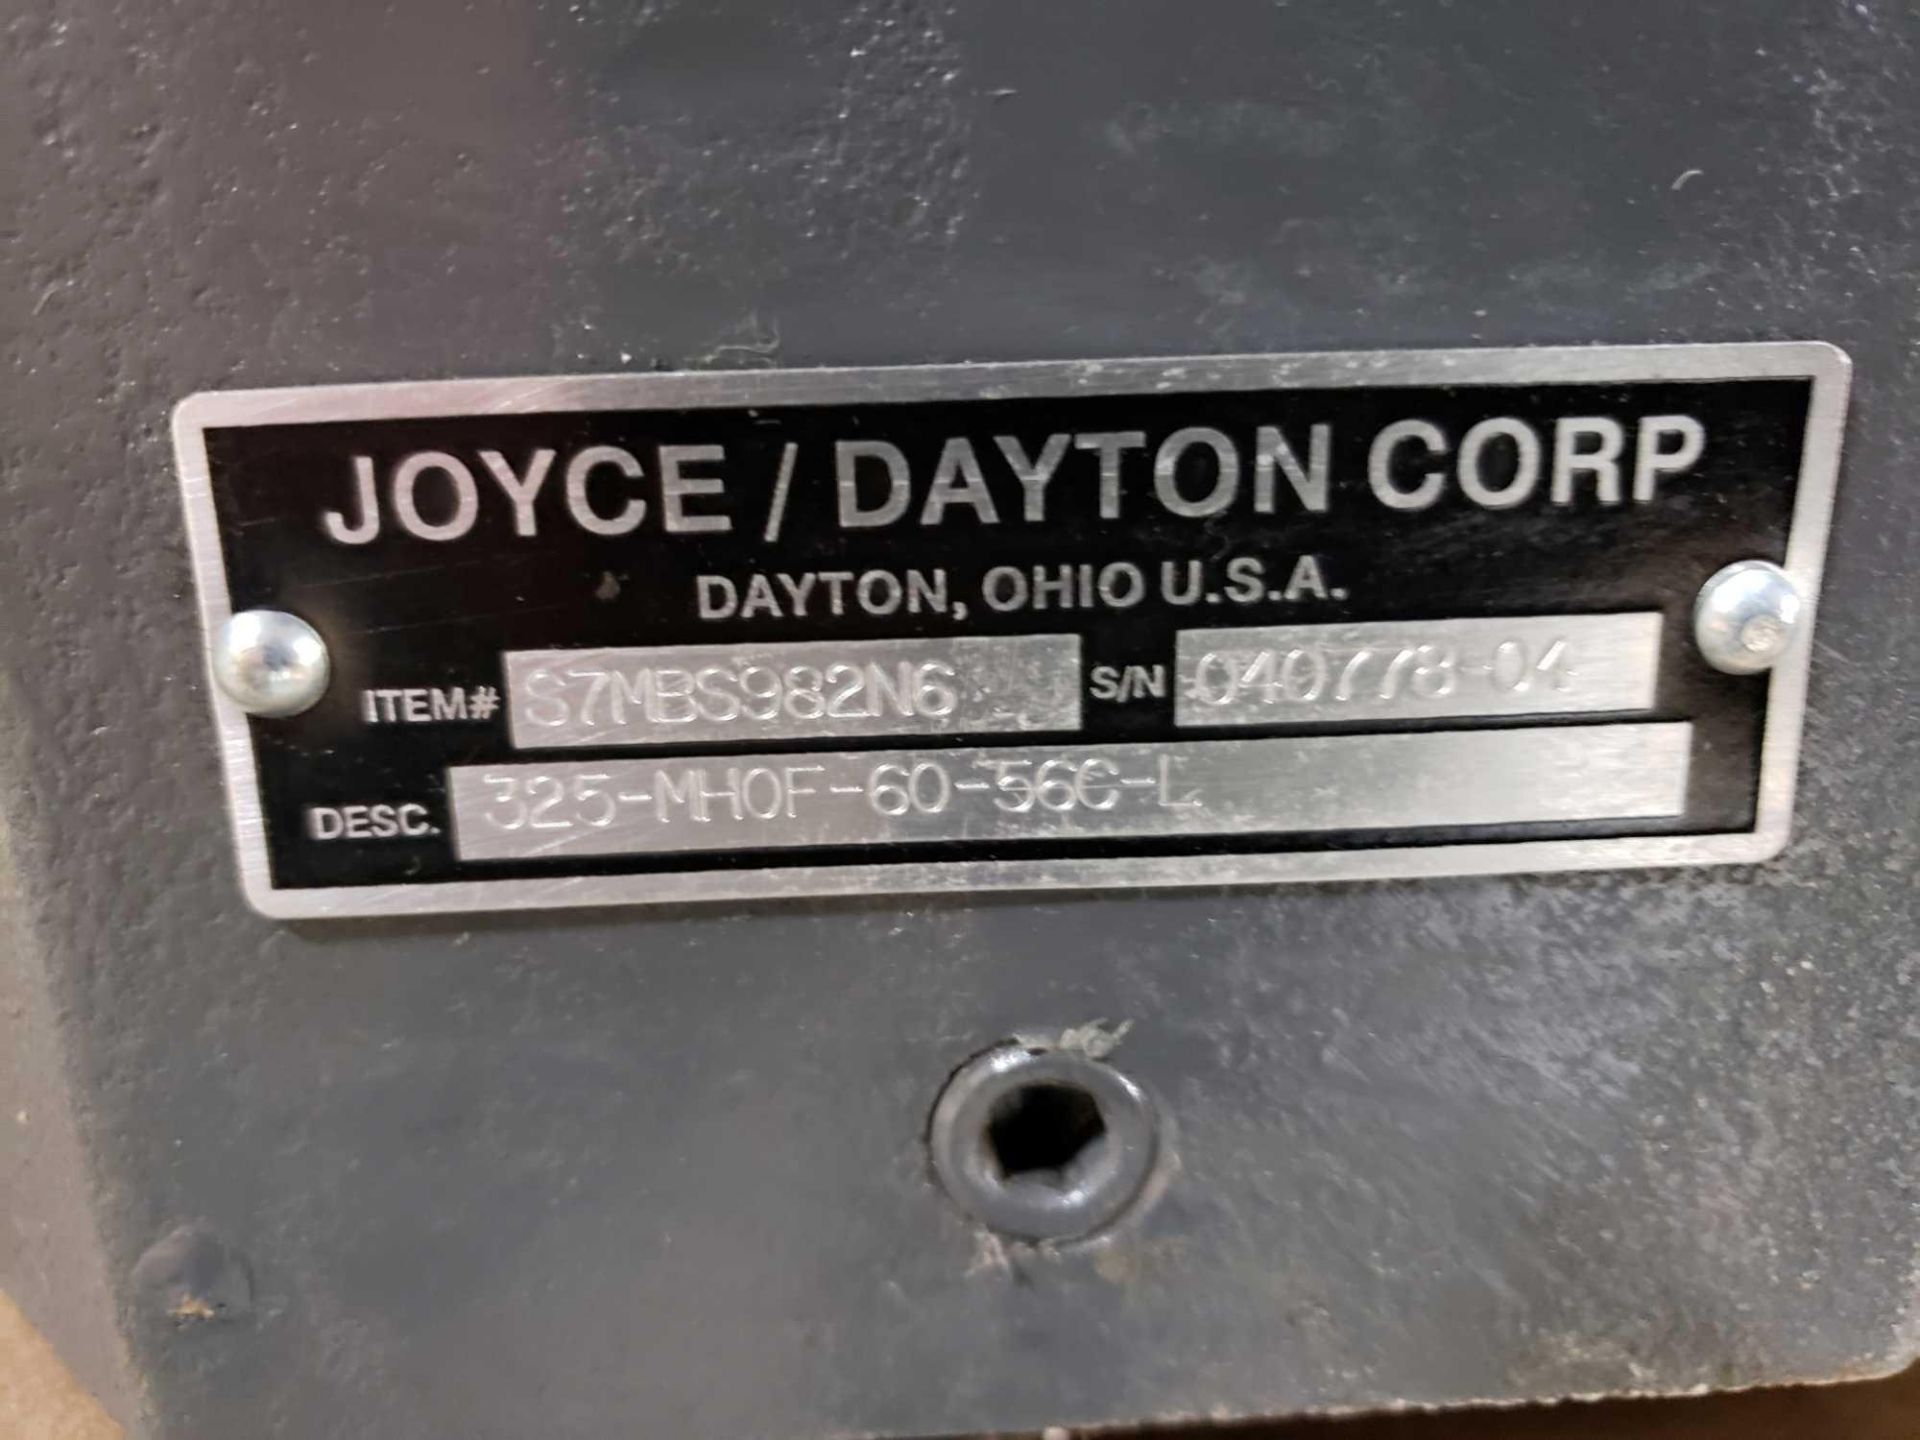 Joyce Dayton gearbox worm gear speed reducer model 325-MHOF-60-56C-L. New as pictured. - Image 2 of 3